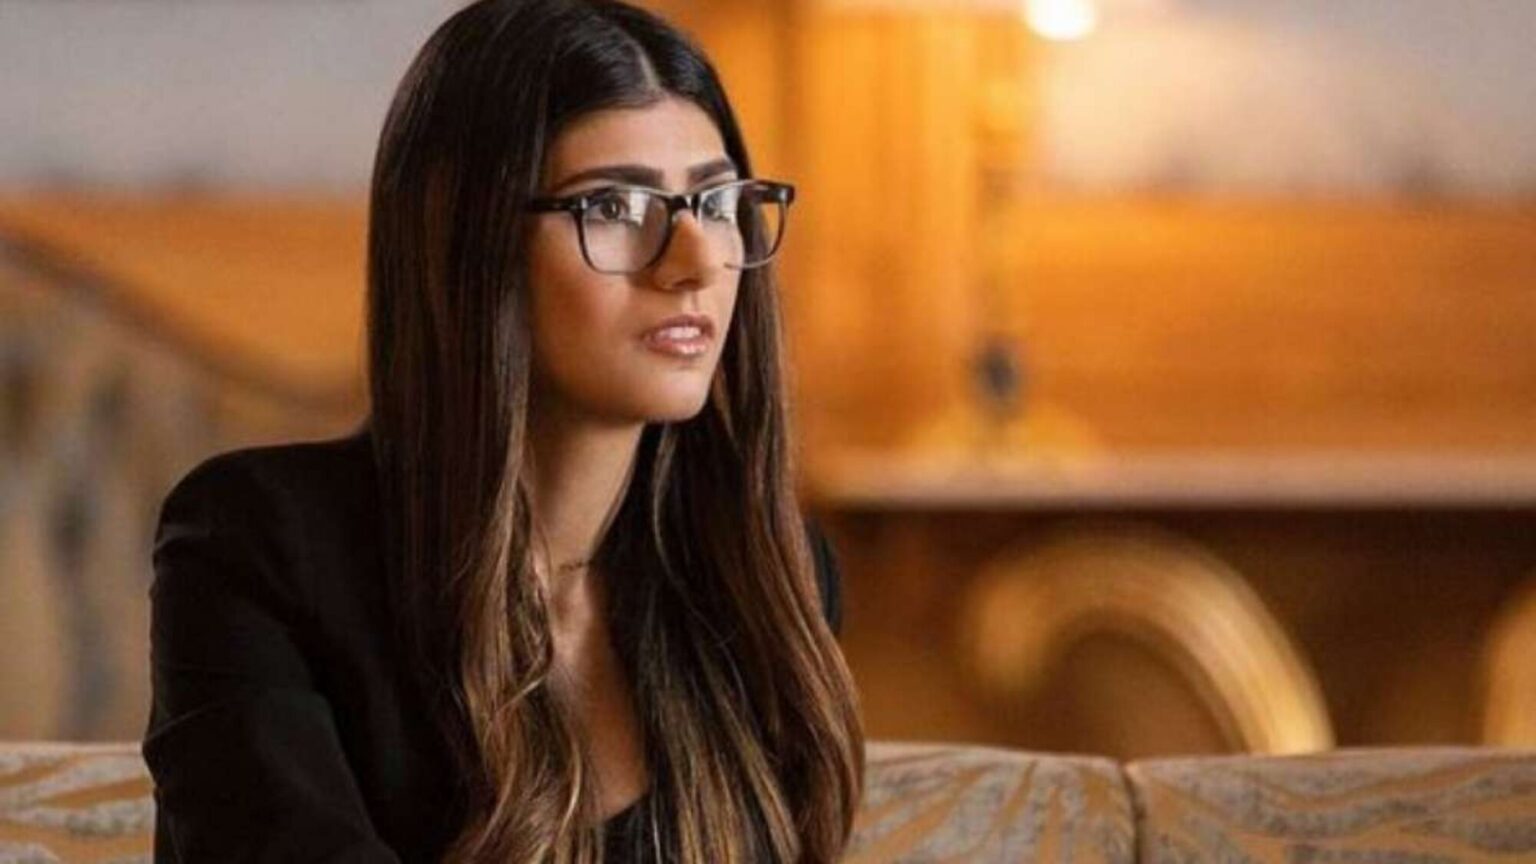 In a series of TikTok videos, Mia Khalifa is taking on the porn industry. See why she's riled up about her past xxx days and what she's saying now.